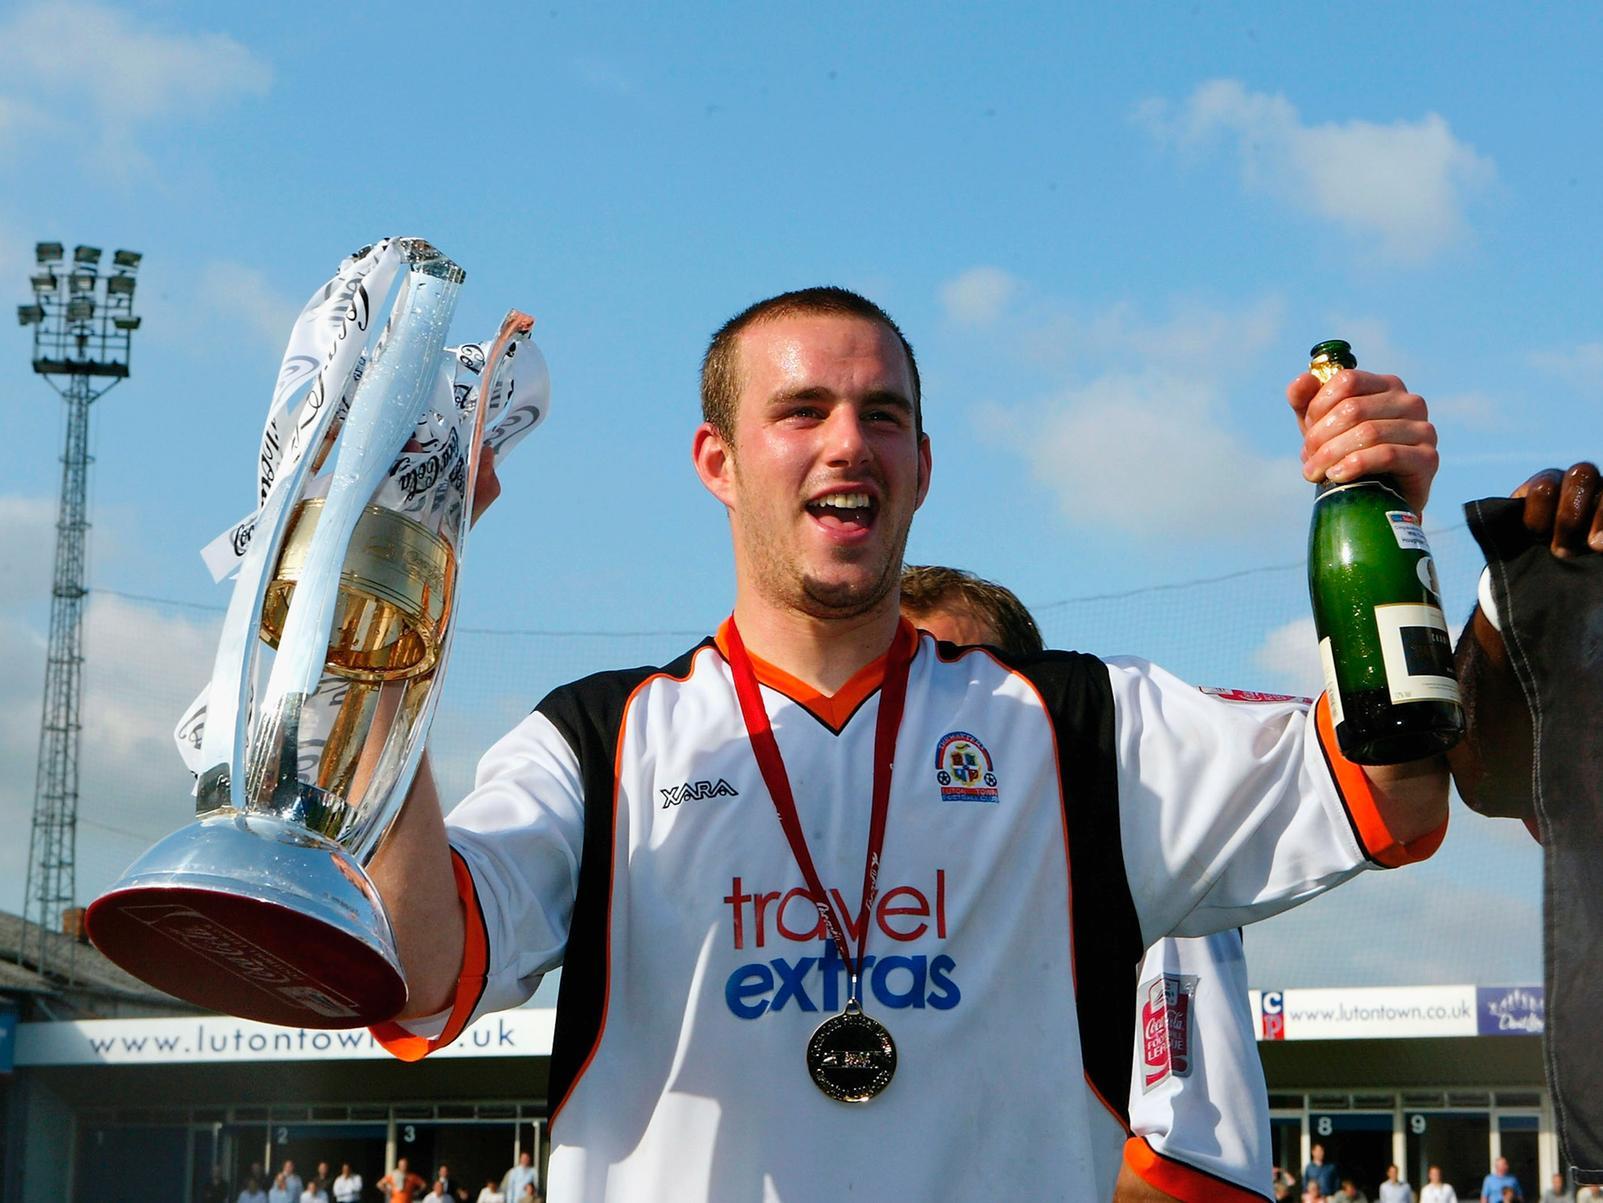 Probably the most fruitful and enjoyable time of my career was spent at Luton and used to absolutely love playing at KR. Played with some great players and believe I played my best football there.